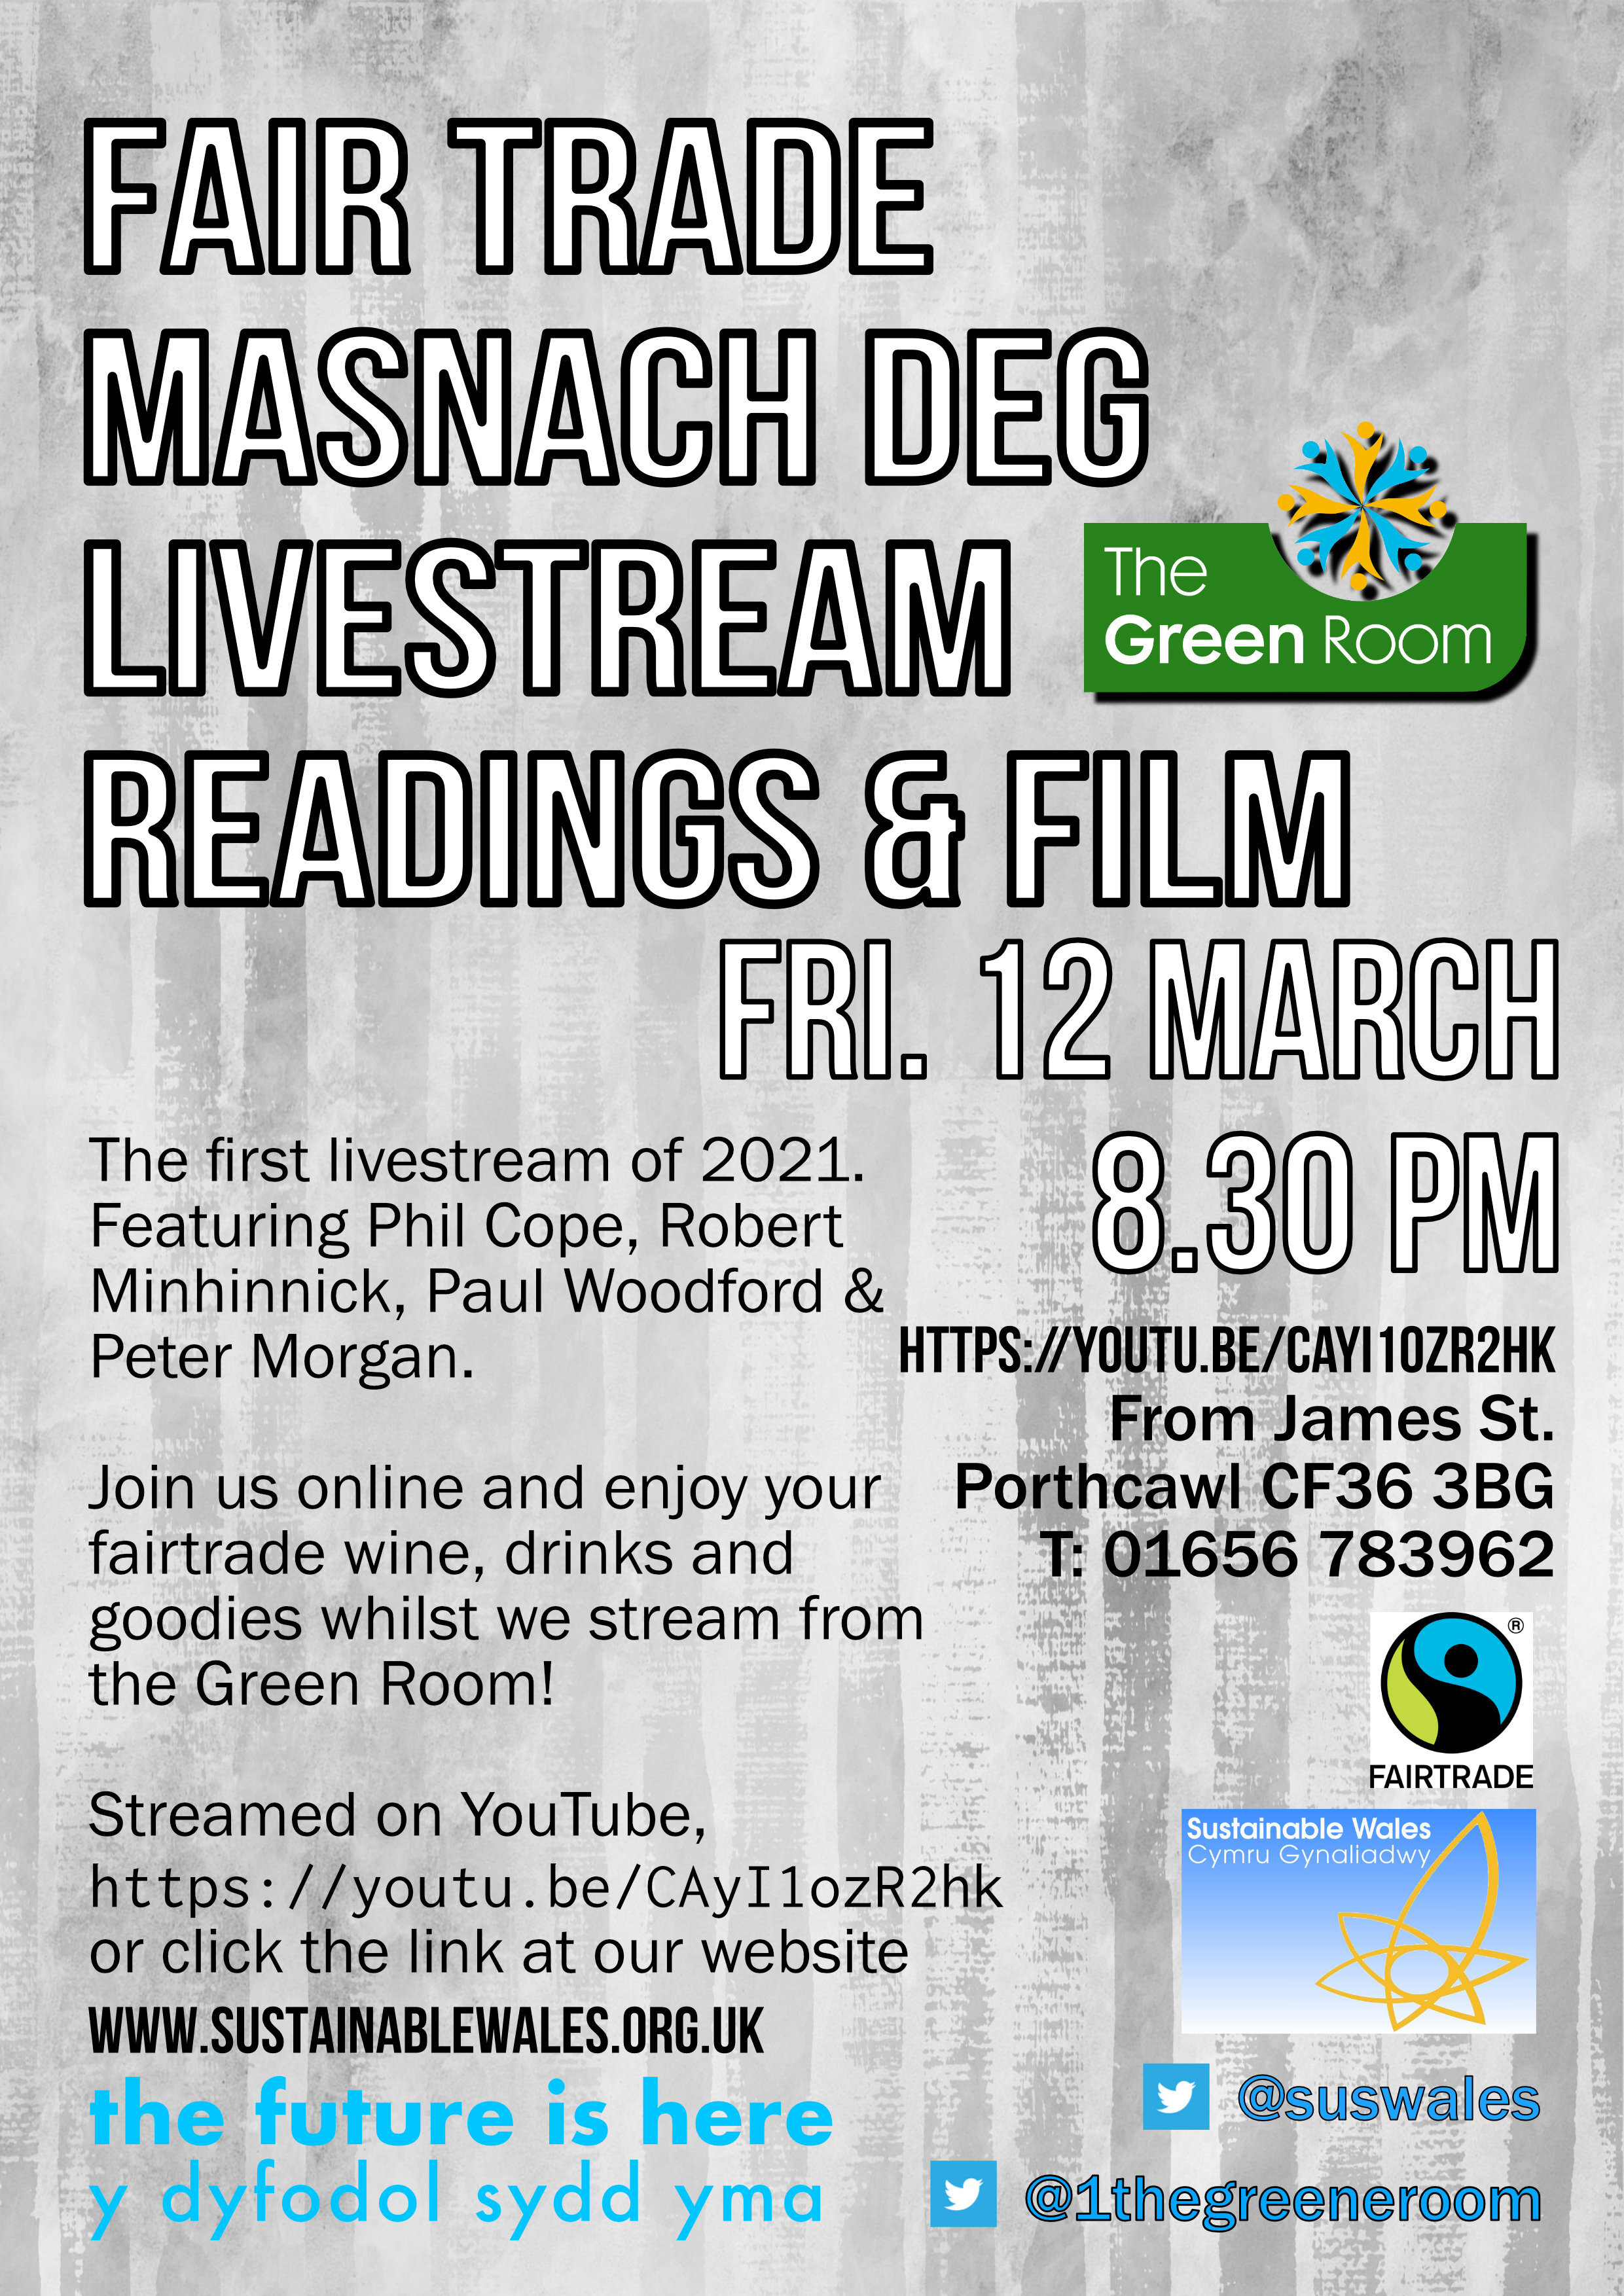 Fair trade / Masnach Deg Readings Livestreamed from the Green Room — Sustainable Wales